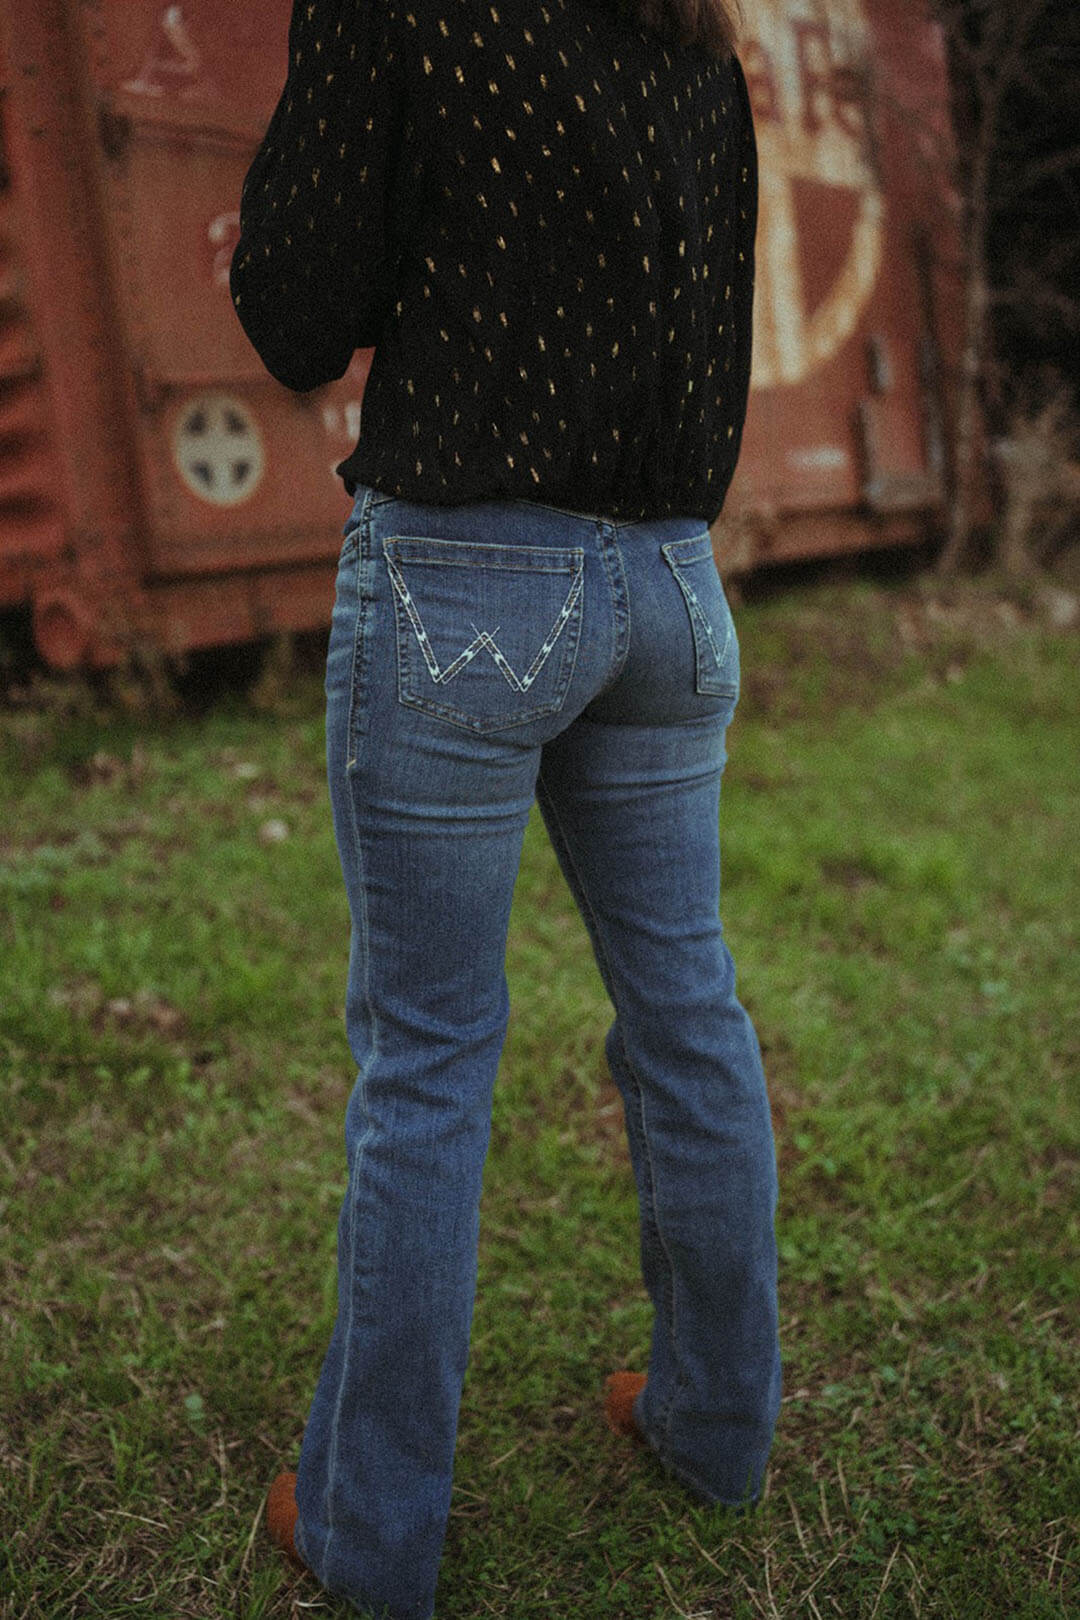 Woman modeling the back of the wrangler willlow nelllie wash bootcut jean.  The jeans have 2 back pockets and have the "W' emblem on each pocket.